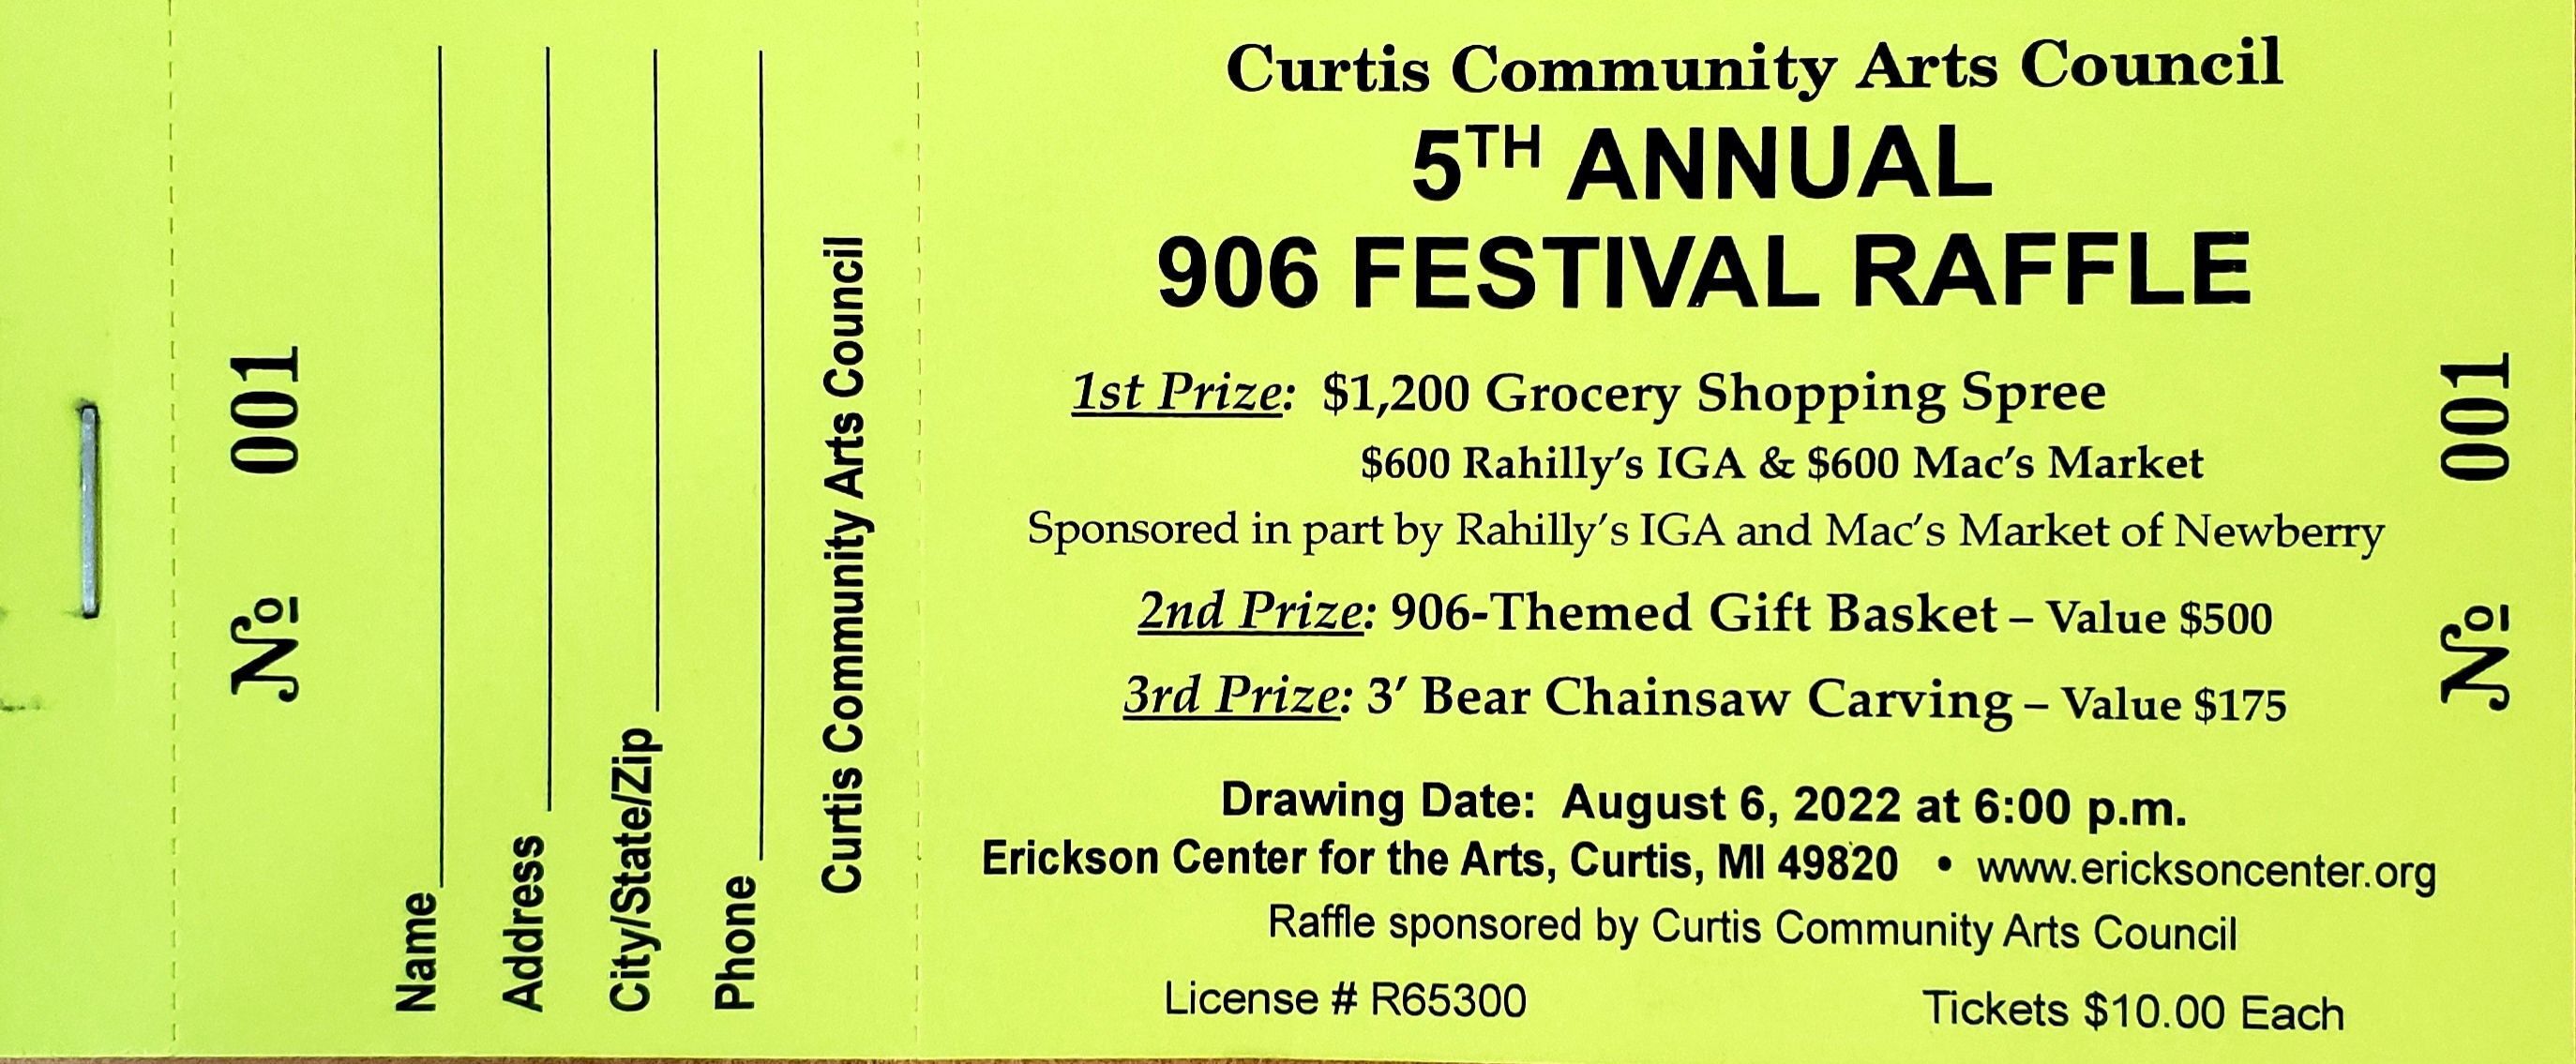 5th Annual 906 Festival Raffle Tickets on sale NOW!